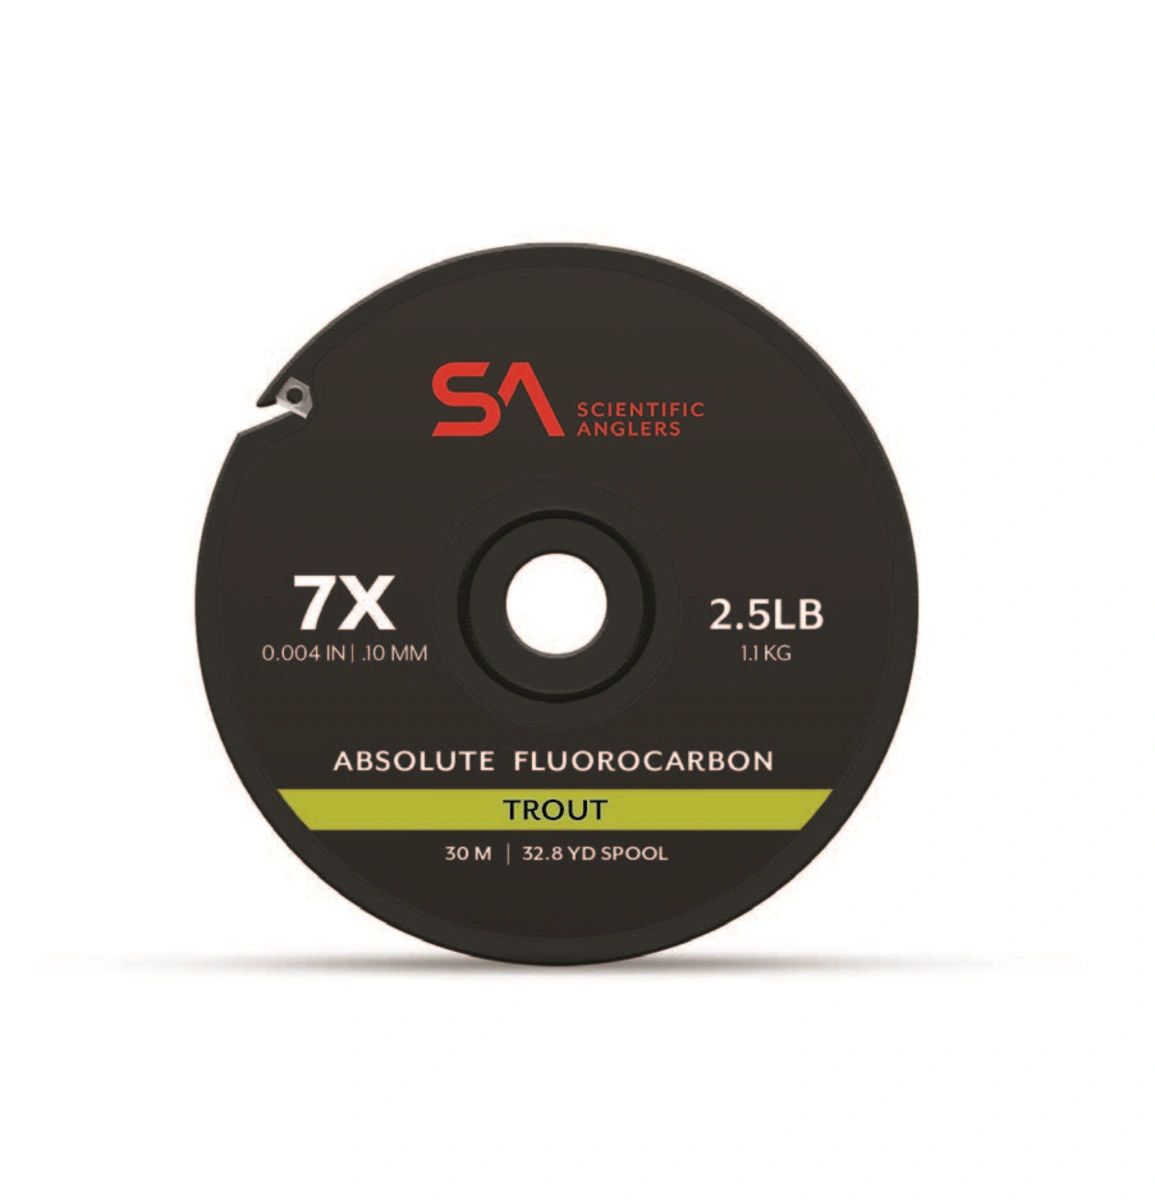 SCIENTIFIC ANGLERS ABSOLUTE FLUOROCARBON TROUT TIPPET